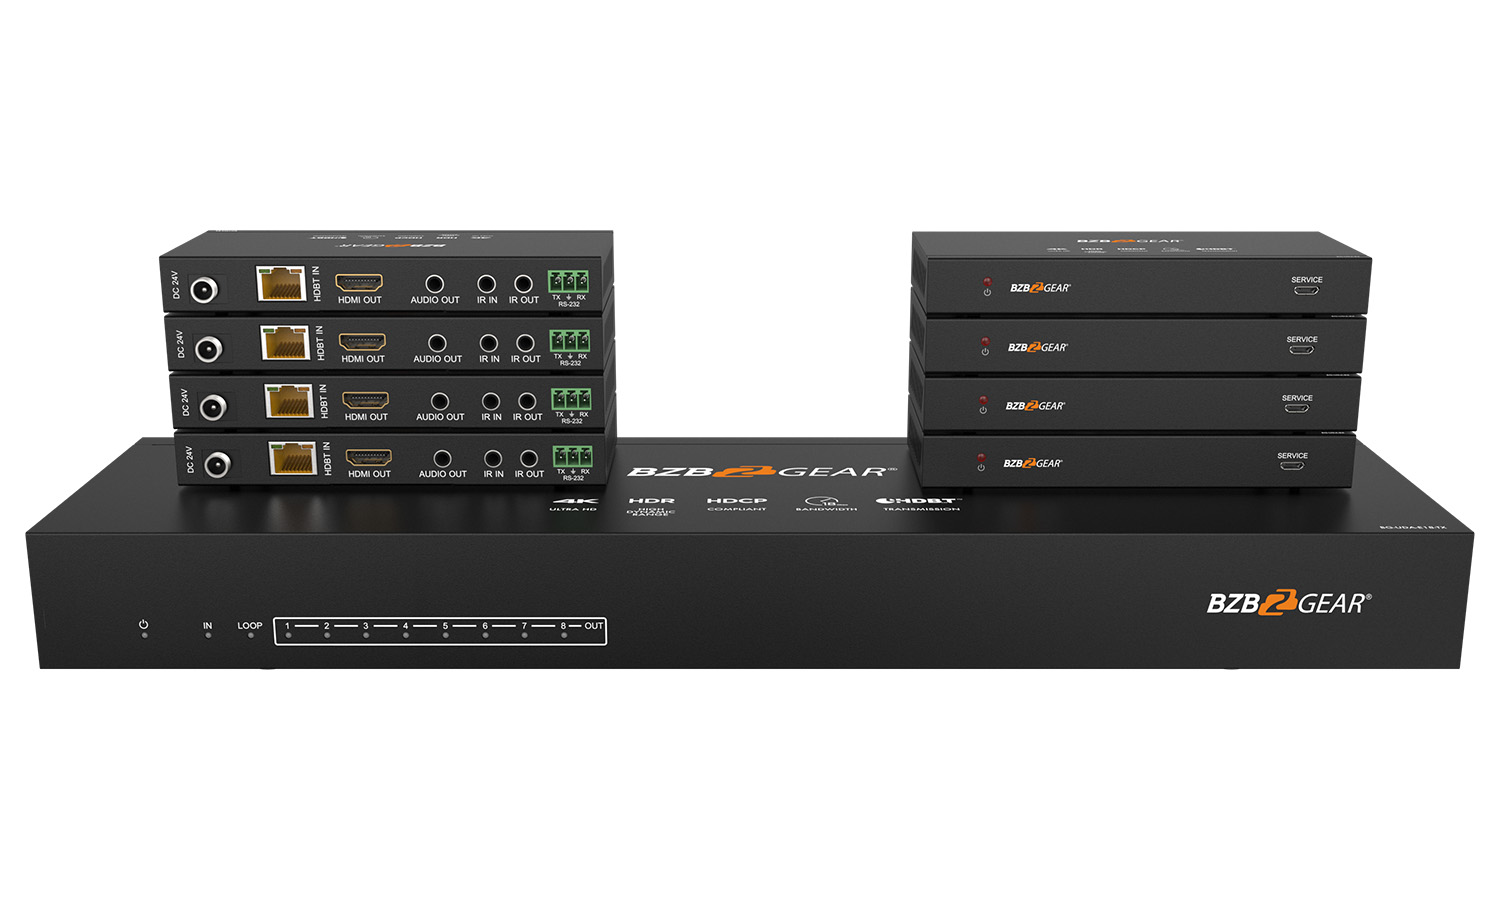 BG-UDA-E18 1X8 4K 18Gbps UHD HDMI HDBaset Splitter/Distribution Amplifier over Single Category 5e/6/7 Cable (Kit, Includes 8x RX) by BZBGEAR